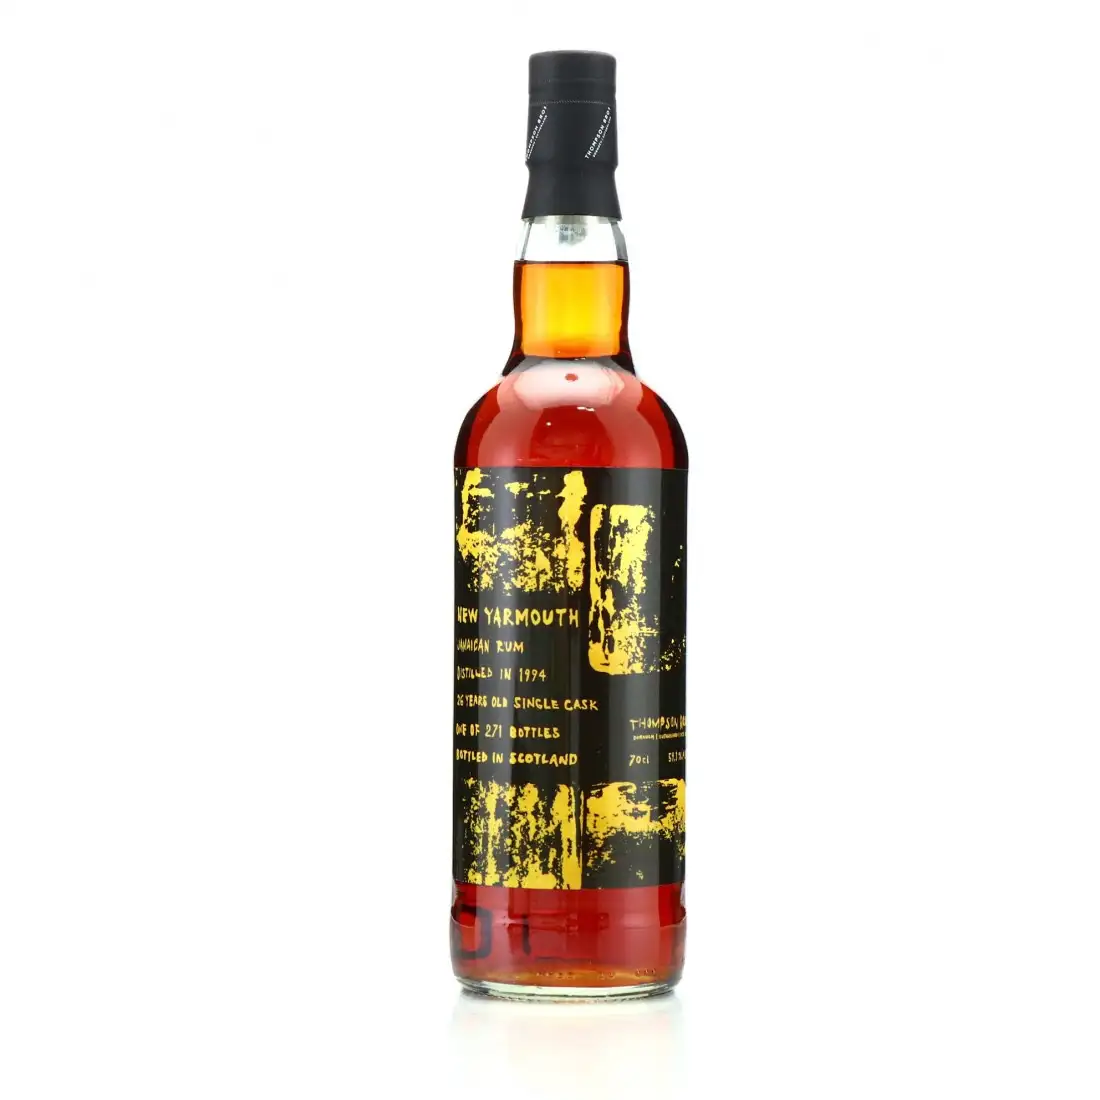 Image of the front of the bottle of the rum Jamaican Rum